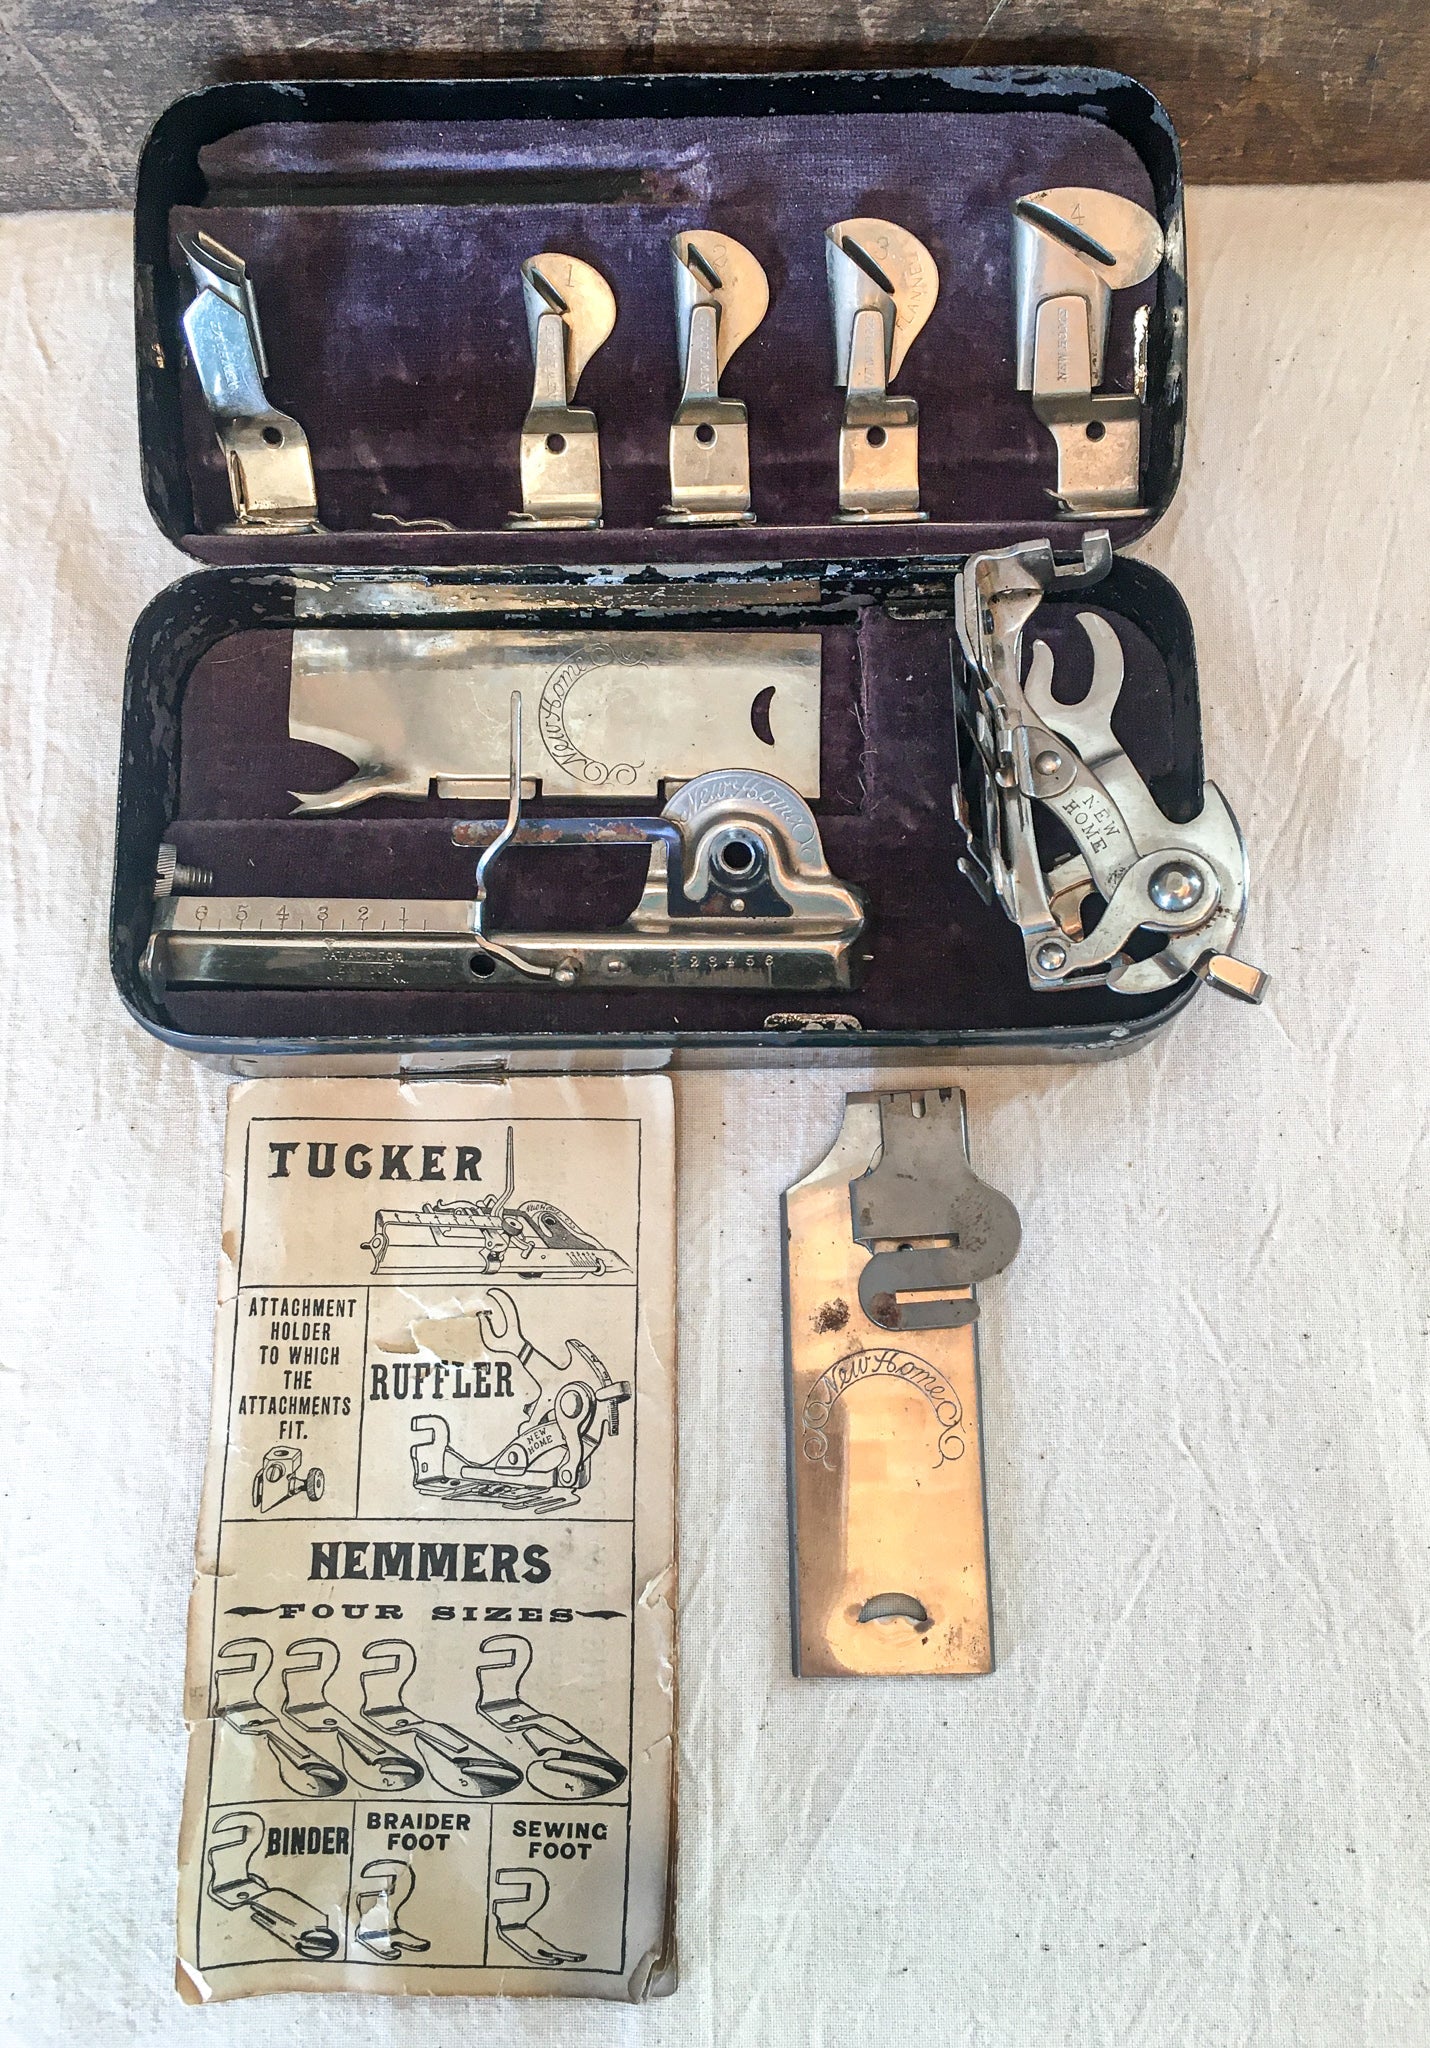 LeHay's Vintage Shop, 1920’s – 1930’s New Home Sewing Machine Parts Box Including Parts and Manual